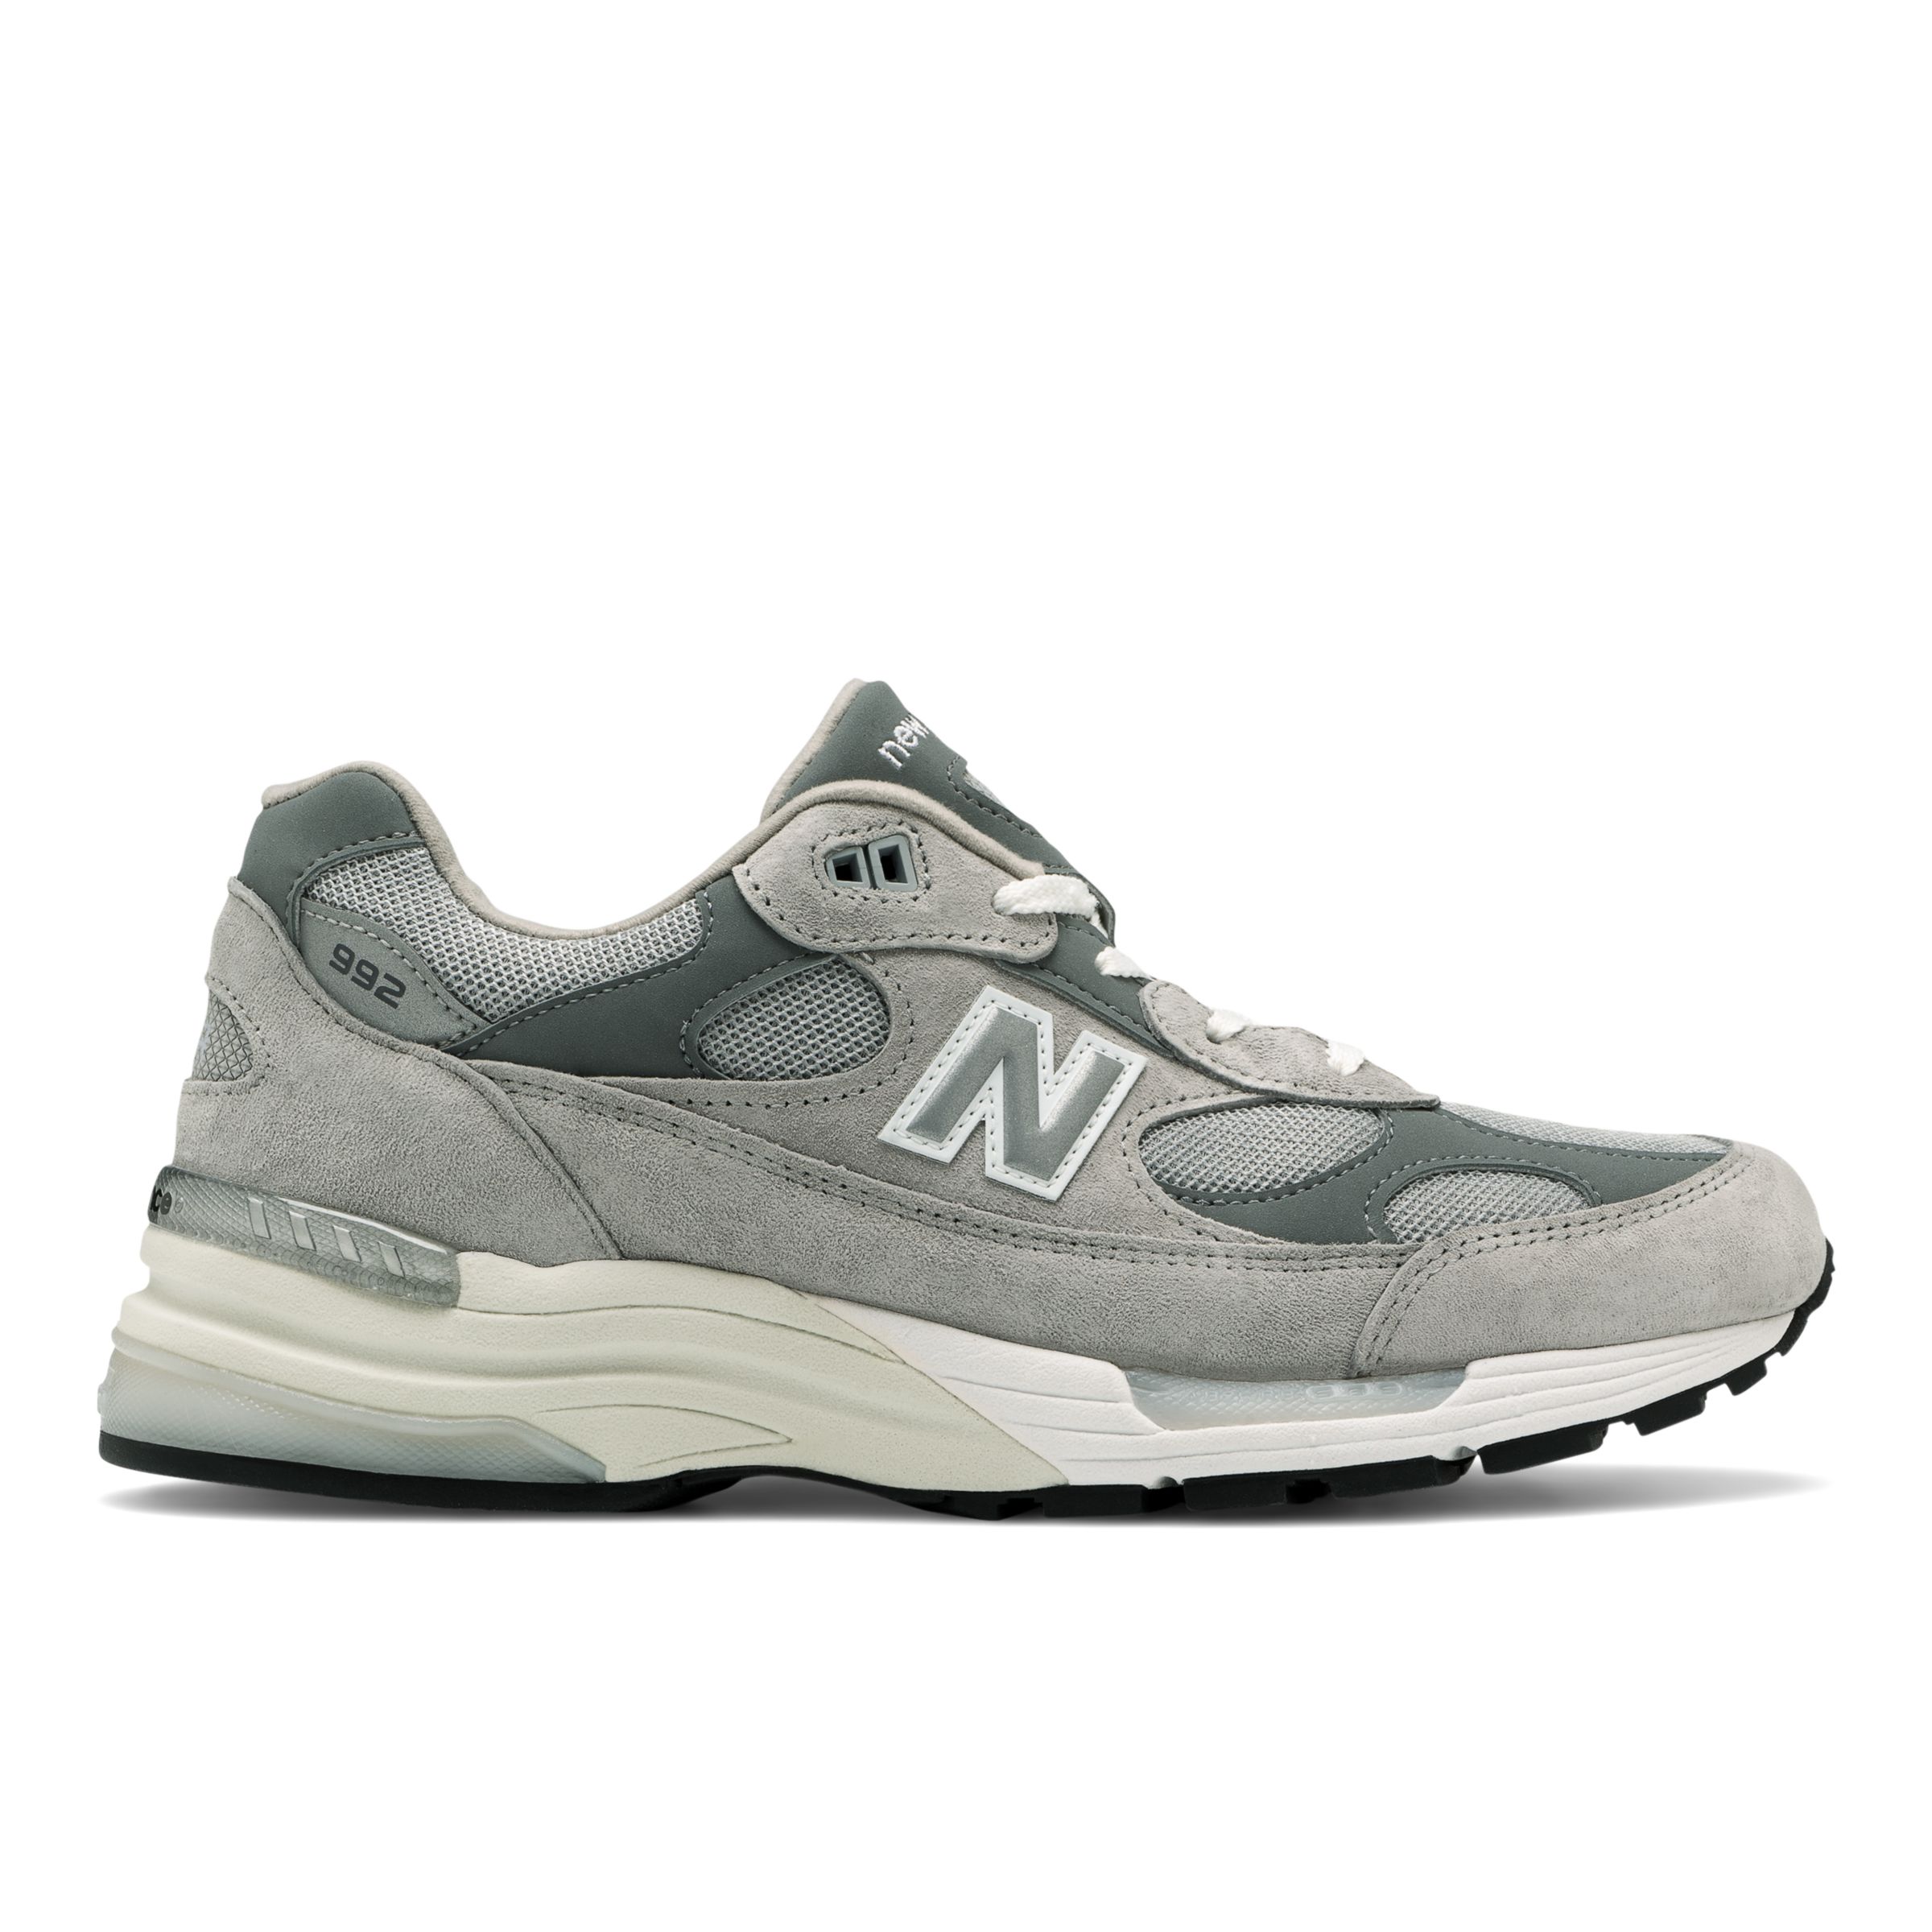 Men's Made in US 992 Shoes - New Balance